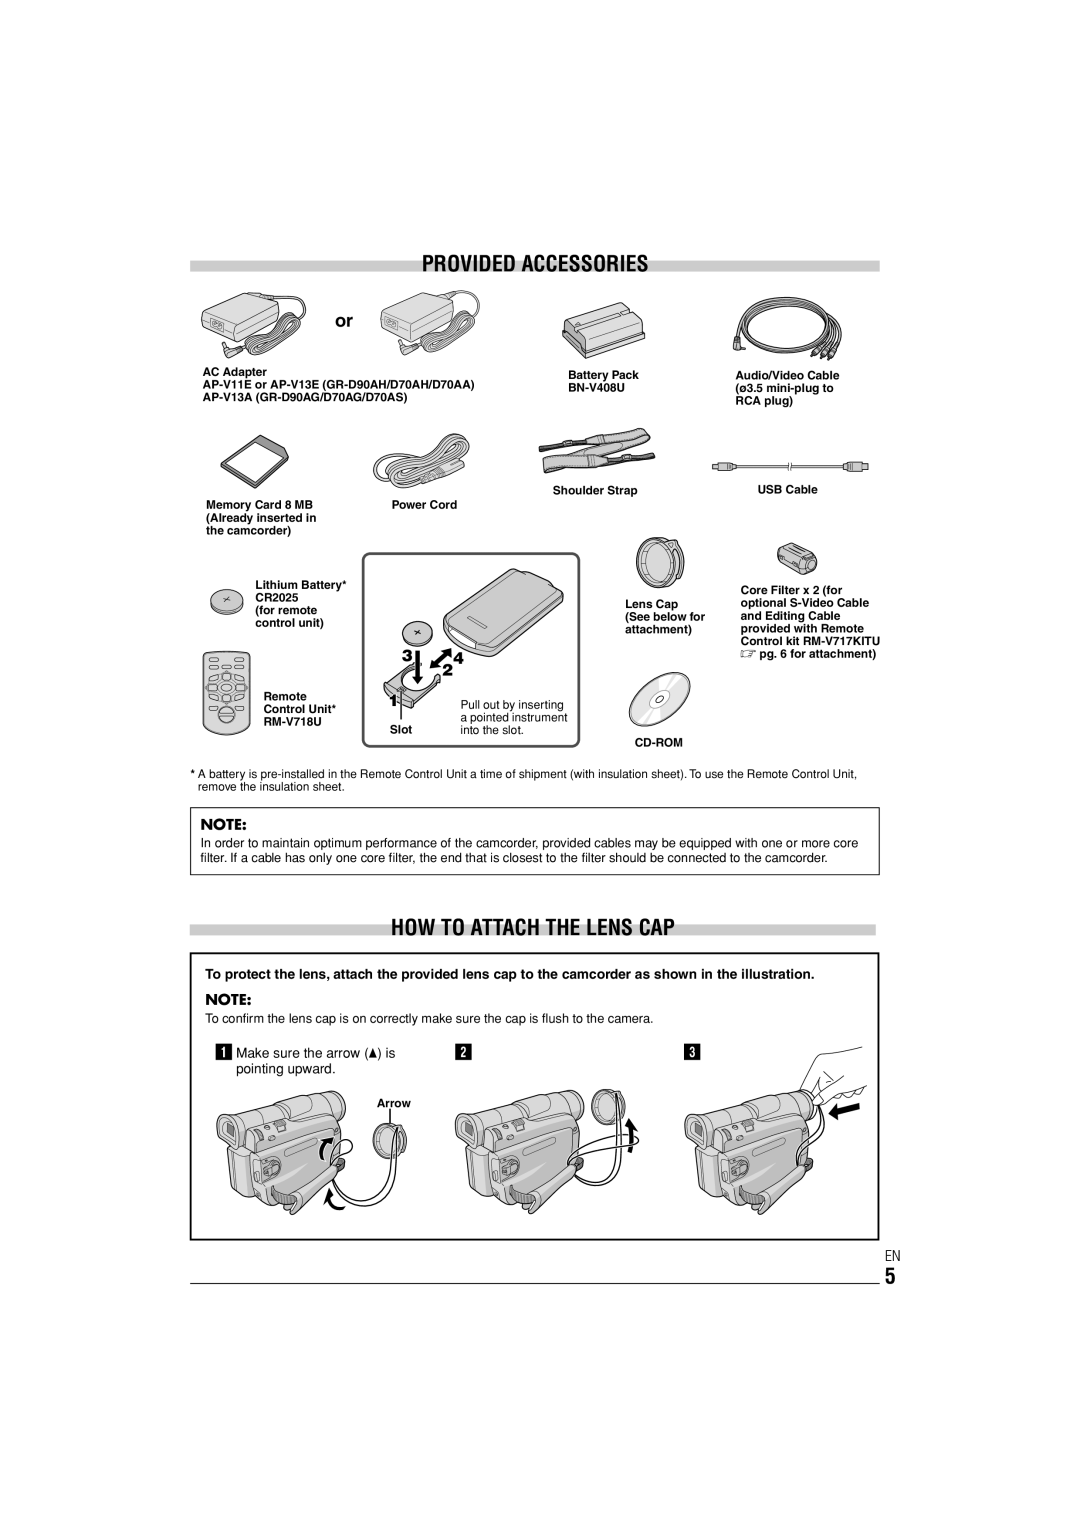 JVC GR-D90 GR-D70 instruction manual Provided Accessories, How To Attach The Lens Cap 